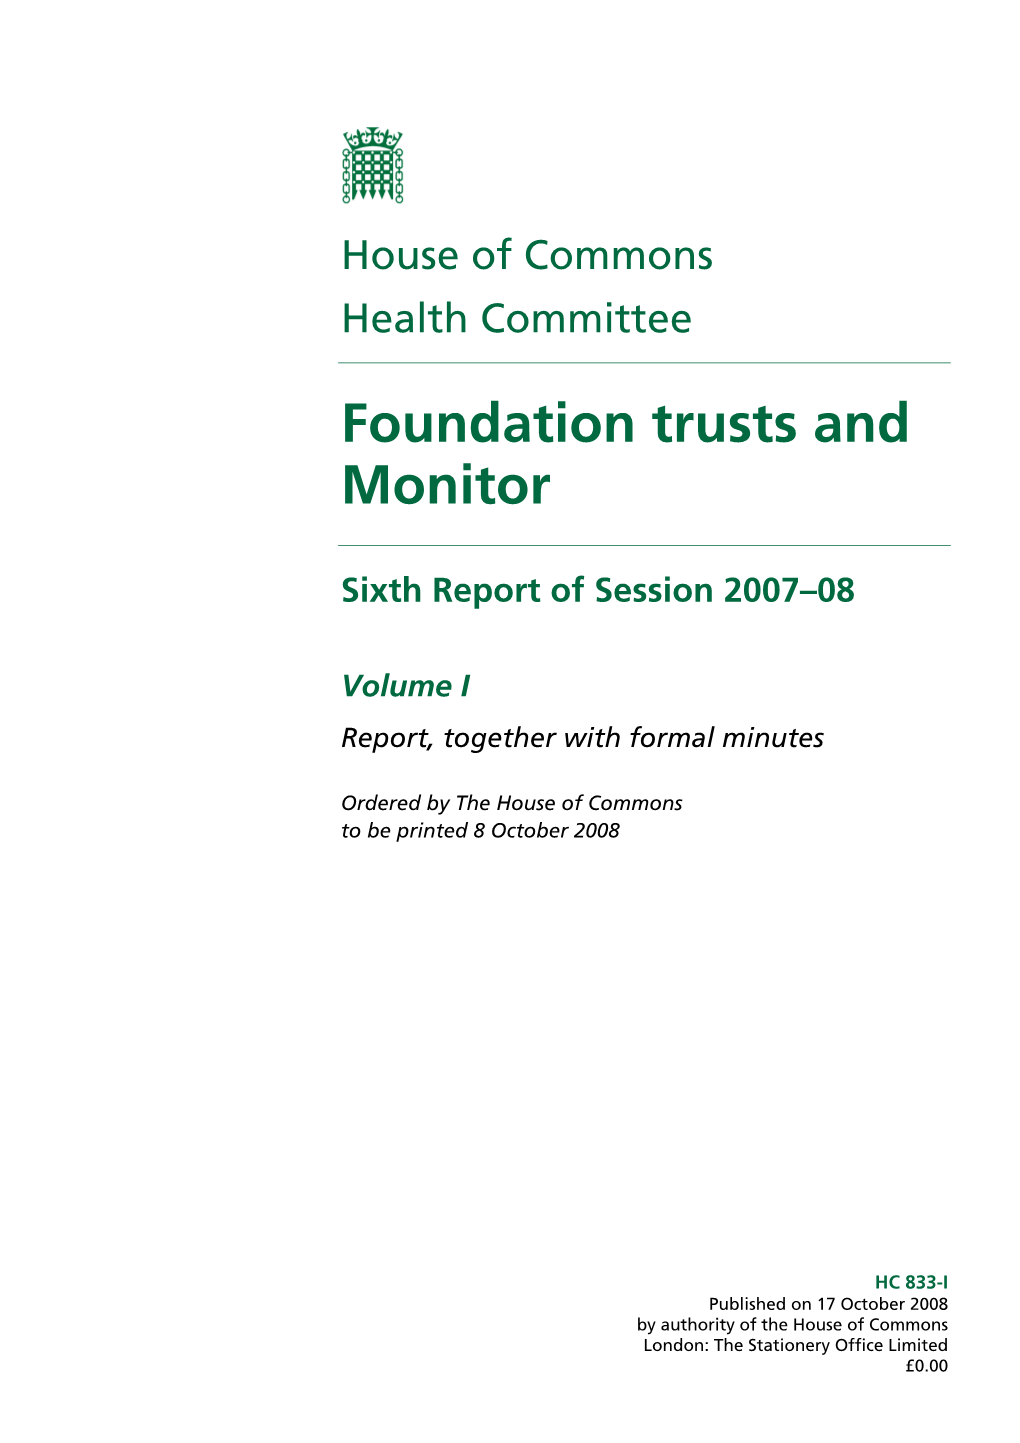 Foundation Trusts and Monitor